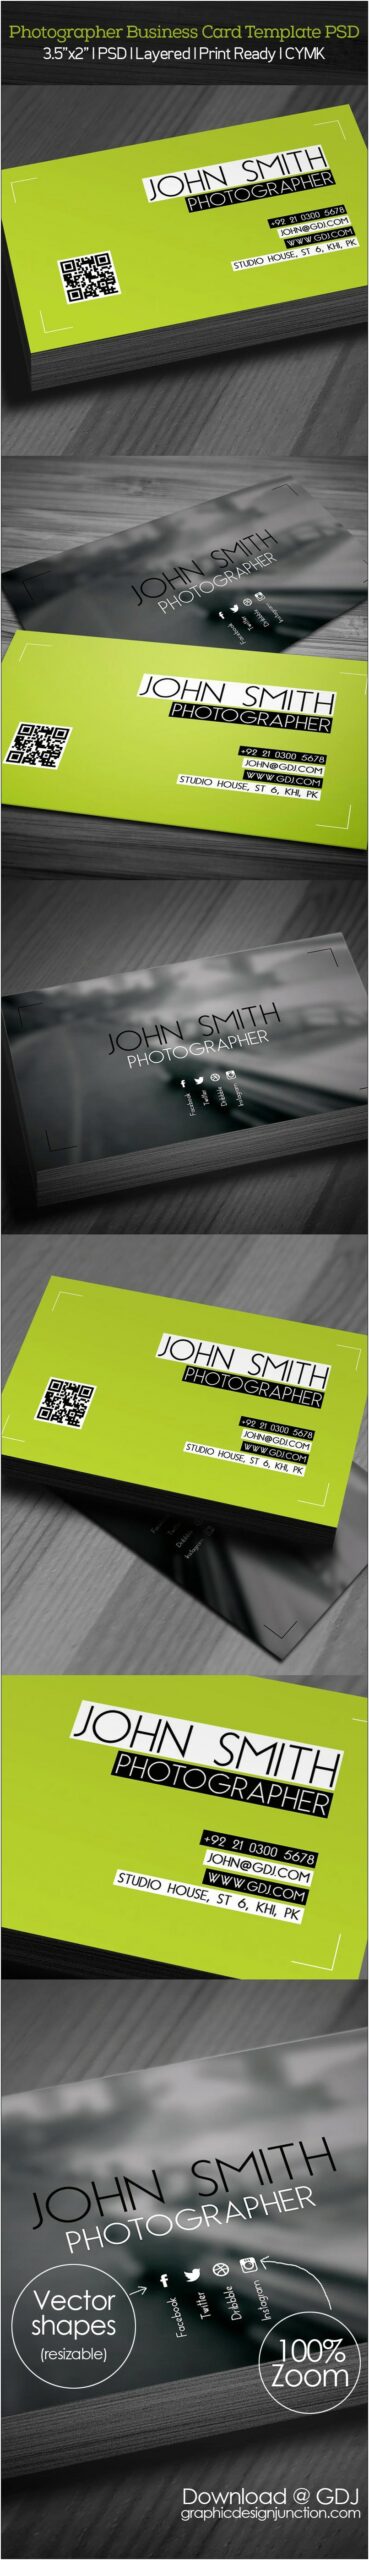 Free Photoshop Card Templates For Photographers